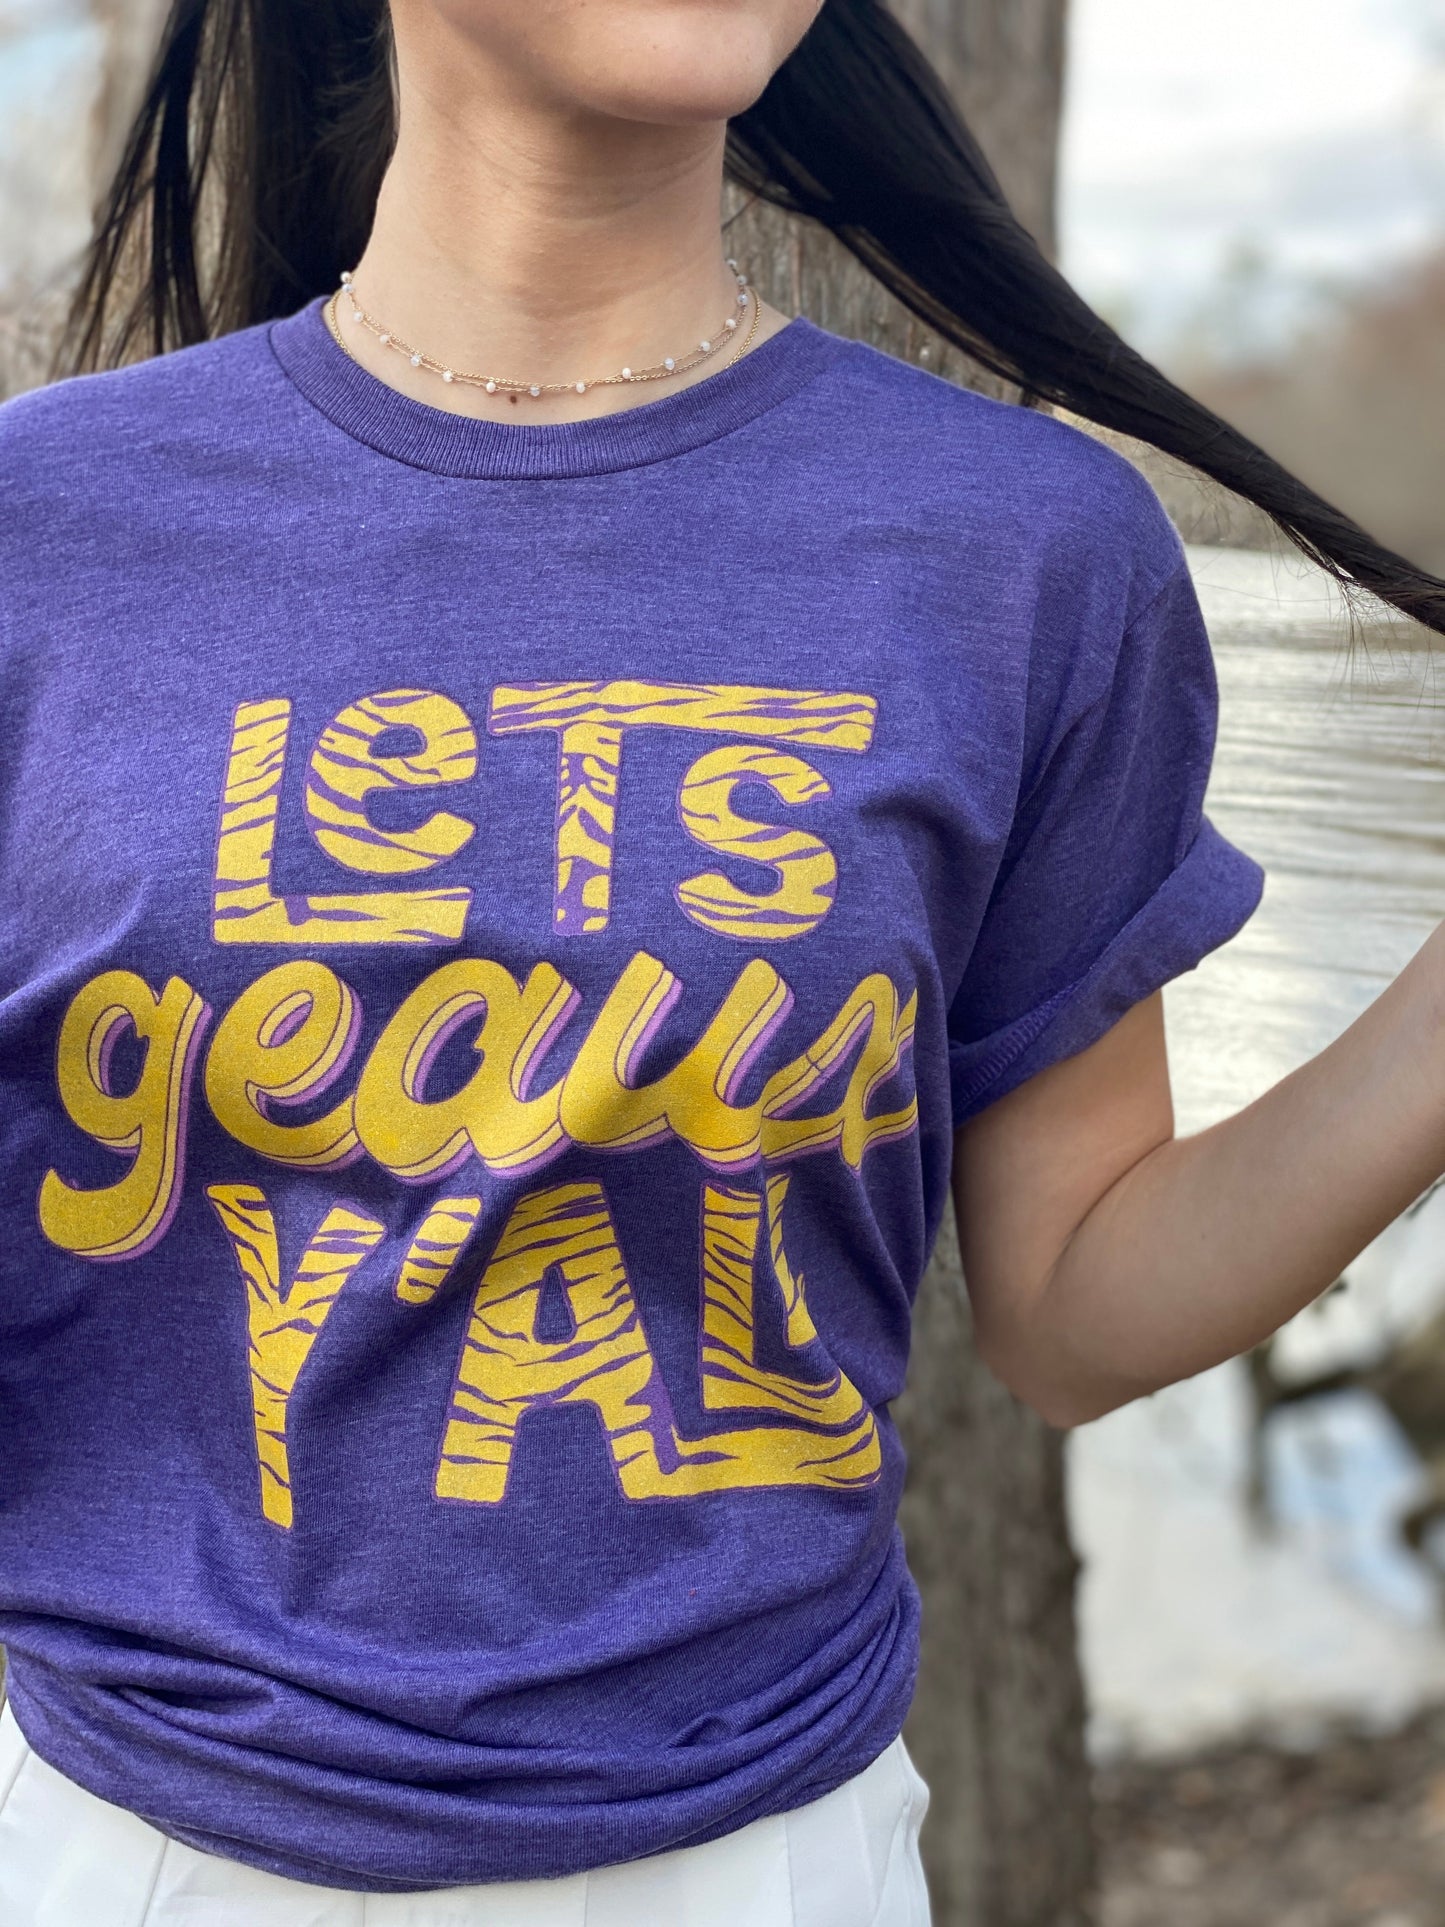 Let's Geaux Y'all Tee - YOUTH